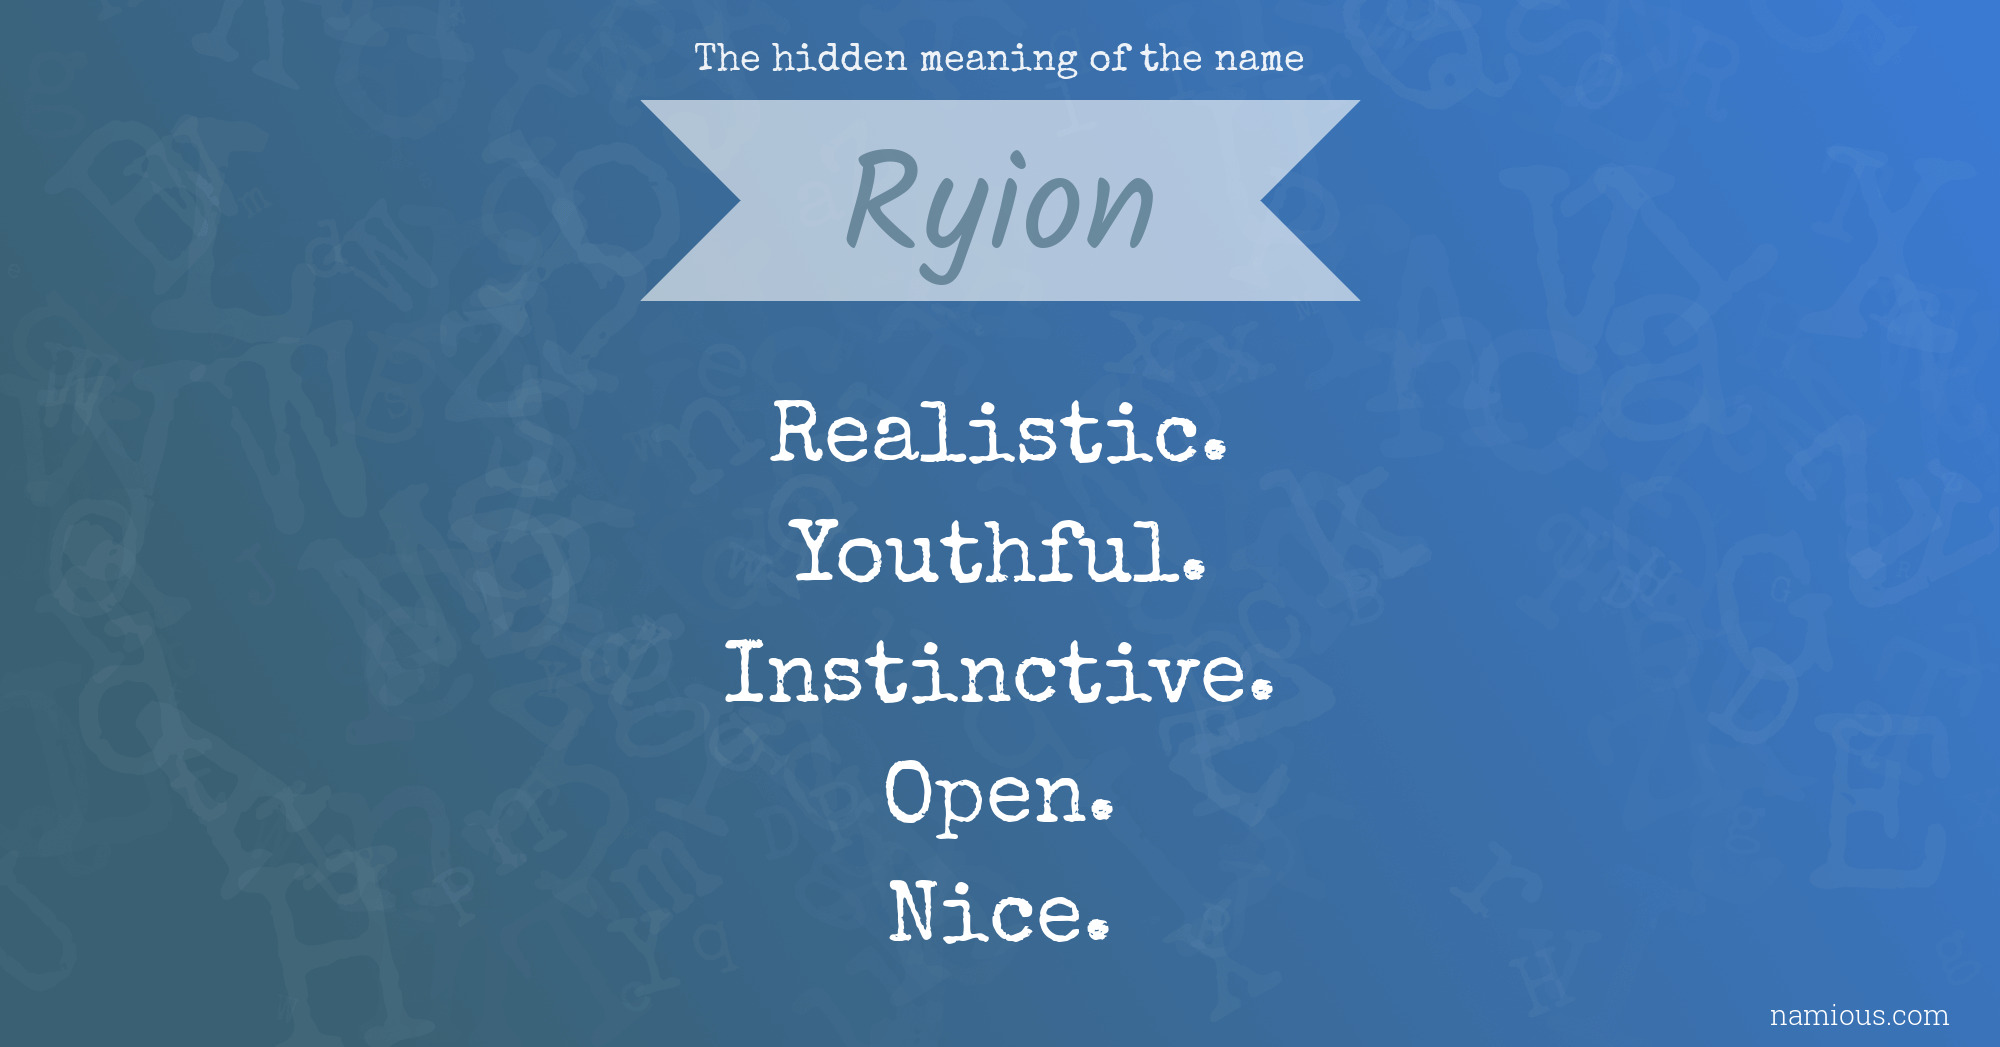 The hidden meaning of the name Ryion